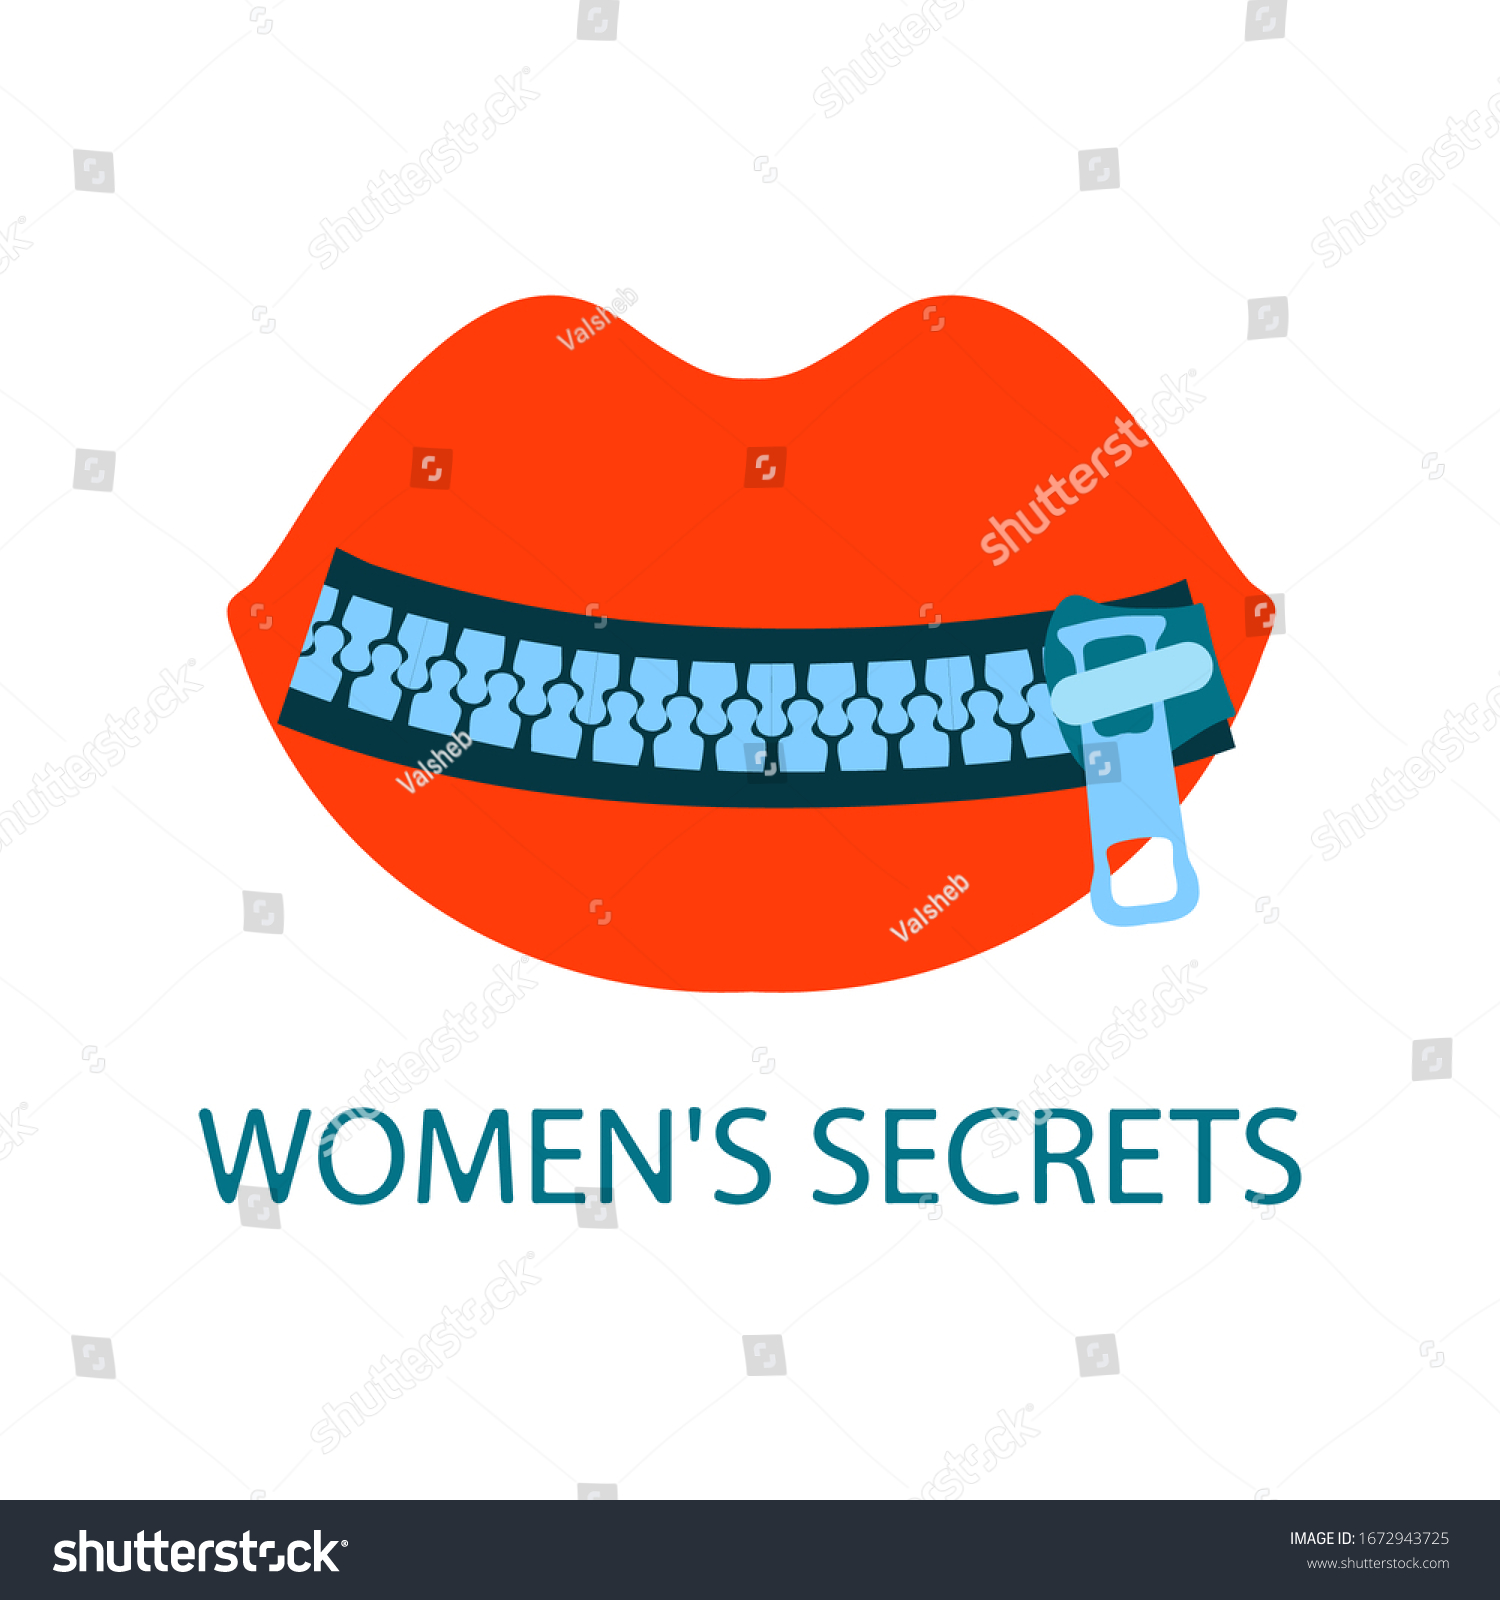 SVG of Vector zipper lock icon on top of the silhouette of scarlet full female lips. Text female secrets. Isolated white background, flat style illustration. Design element for logo, label, web banner, card svg